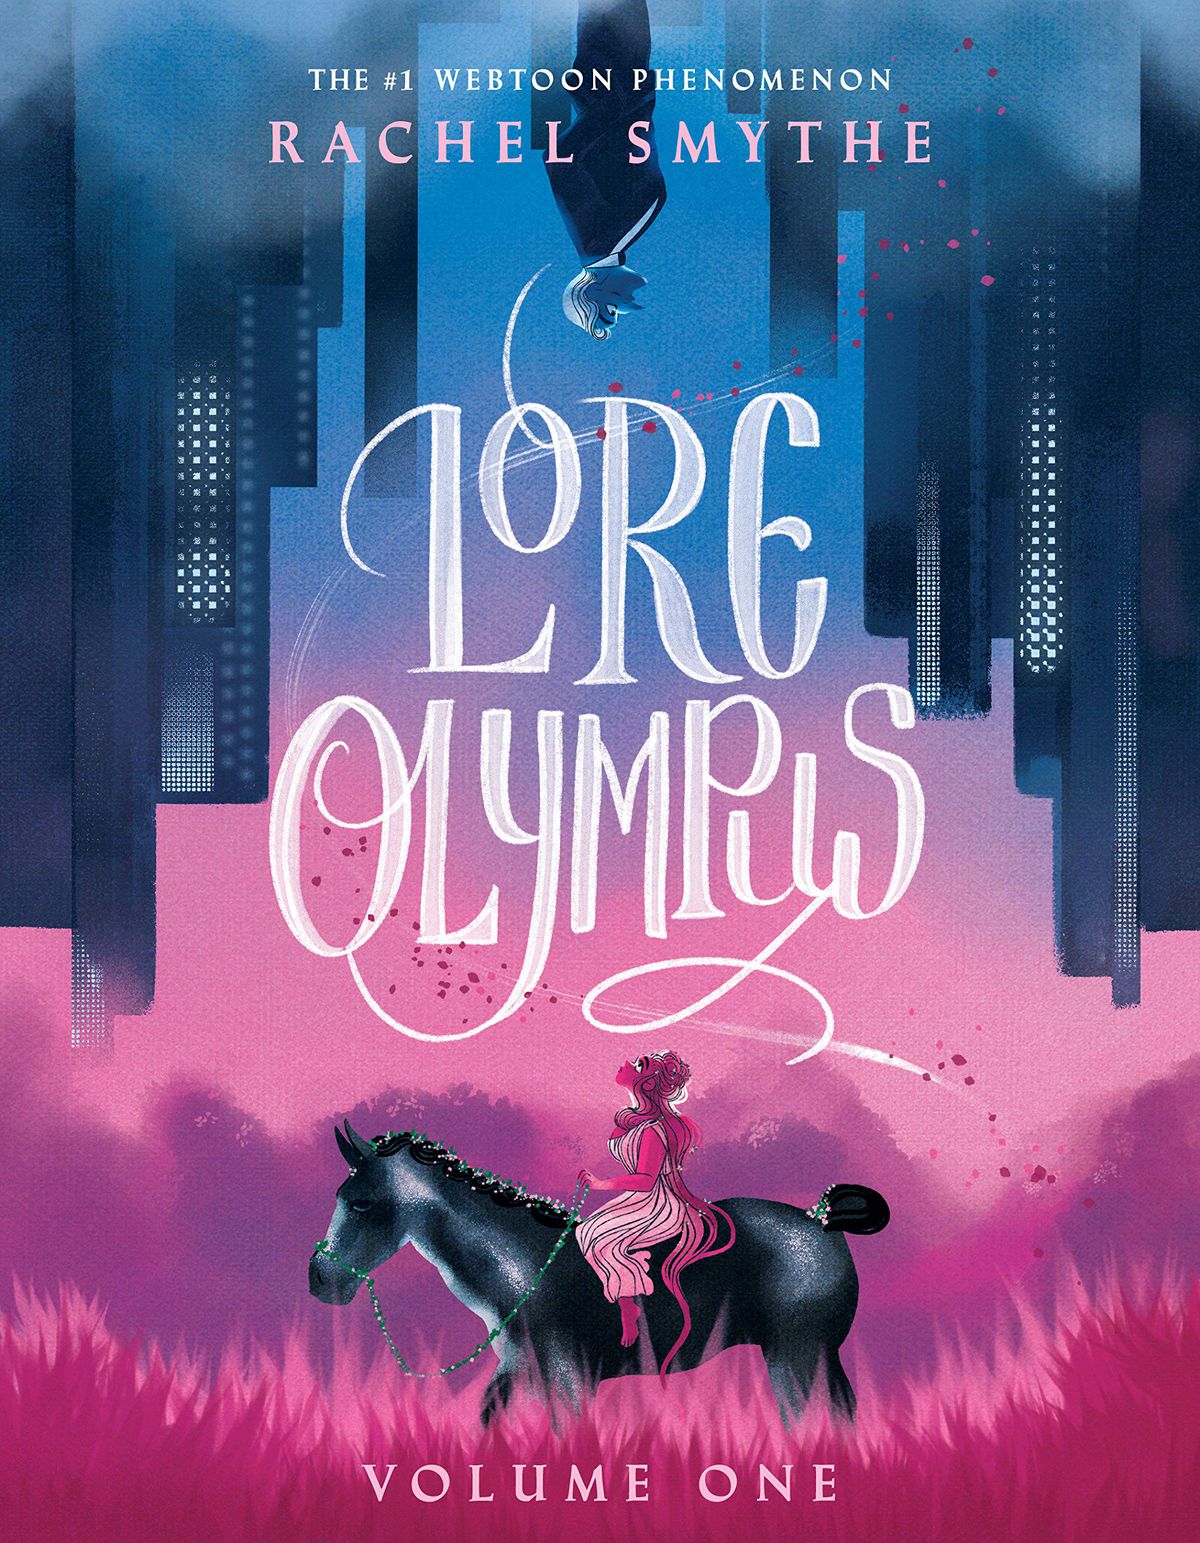 Persephone rides a black horse through a pink field, Hades hangs suspended above her on the cover of Lore Olympus Vol. 1. 